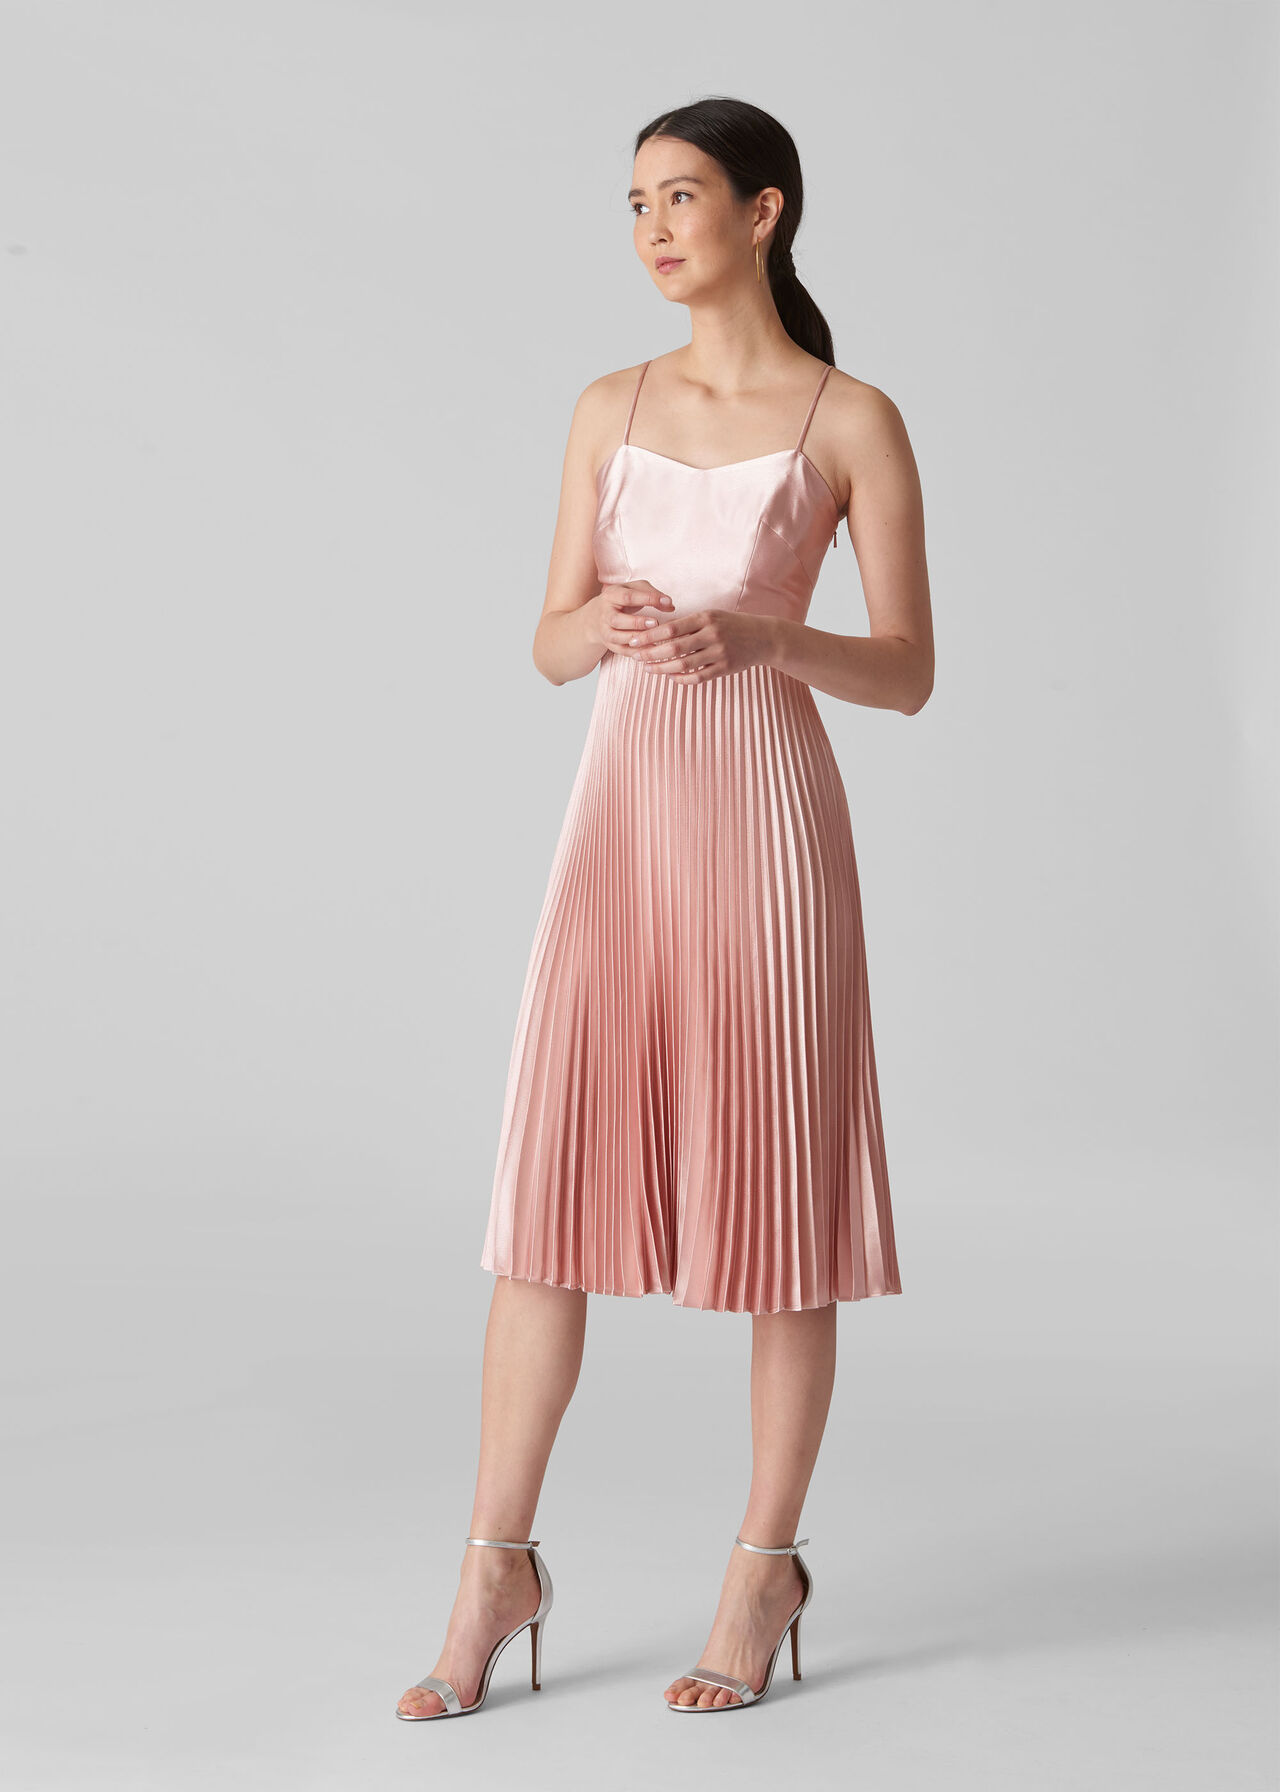 Pale Pink Satin Pleated Strappy Dress | WHISTLES | Whistles UK